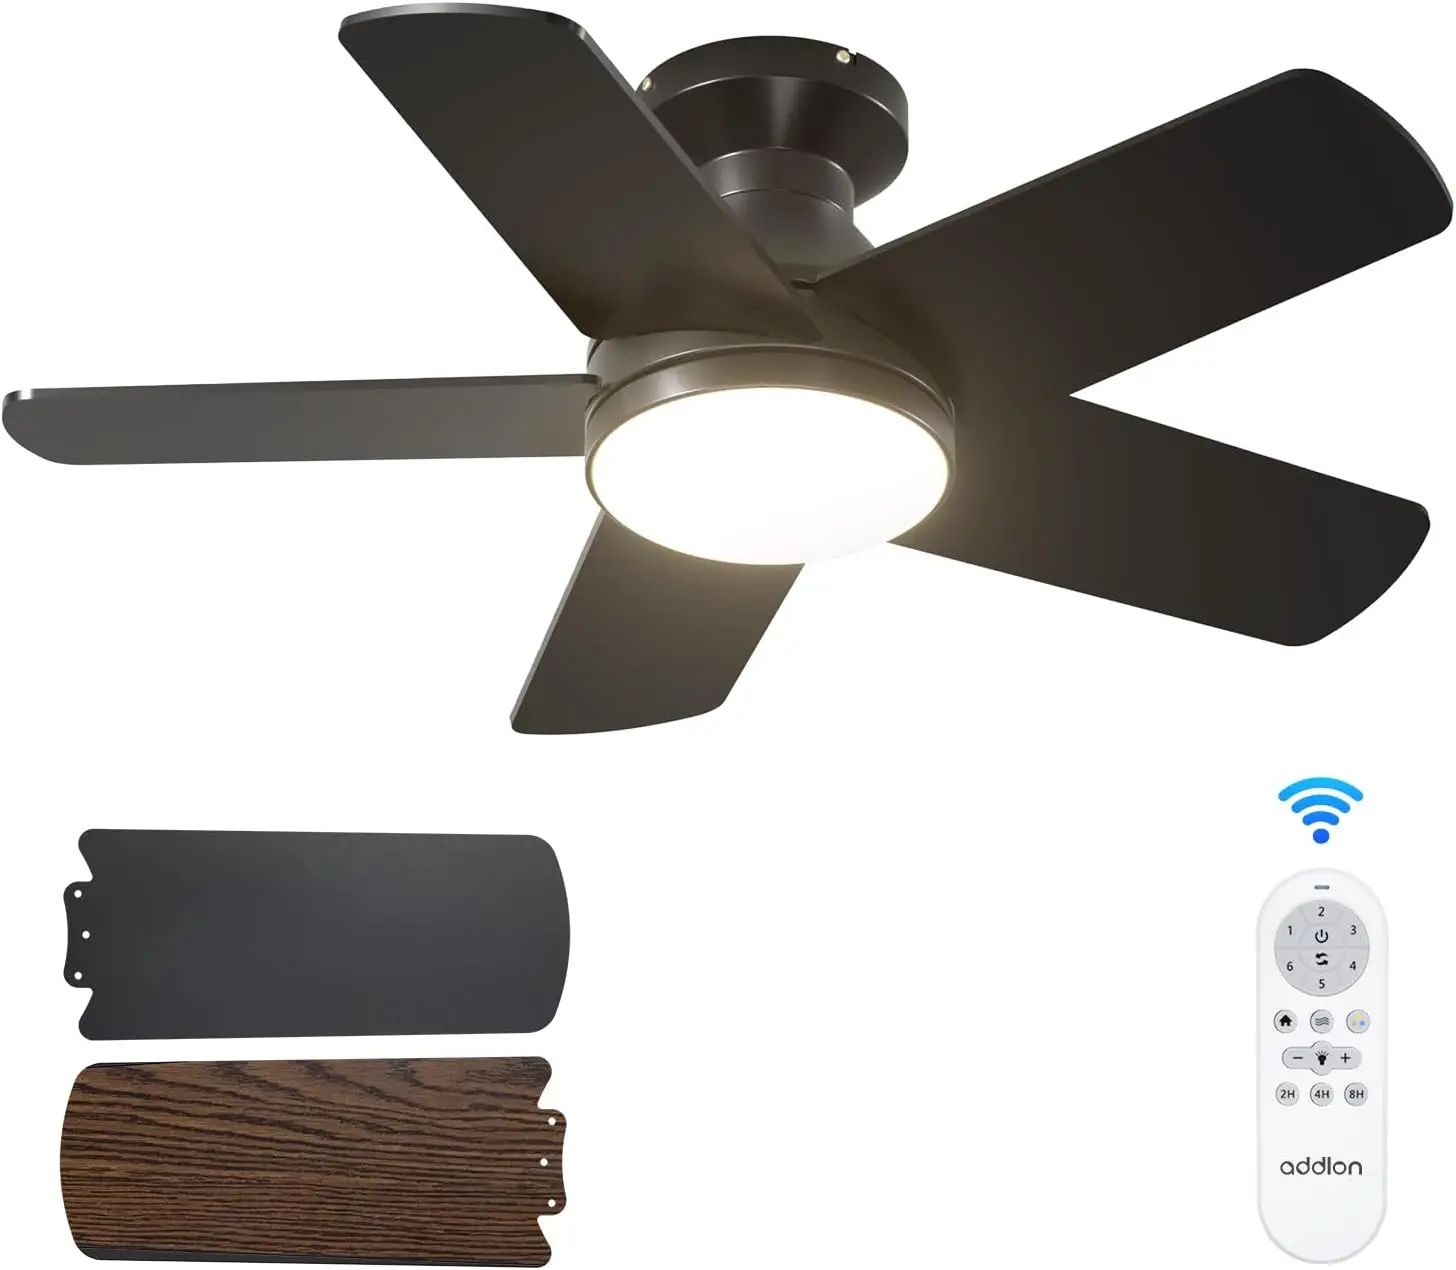 

addlon Ceiling Fans with Lights, 32 inch Low Profile Ceiling Fan with Light and Remote Control, Flush Mount, Reversible, 3CCT